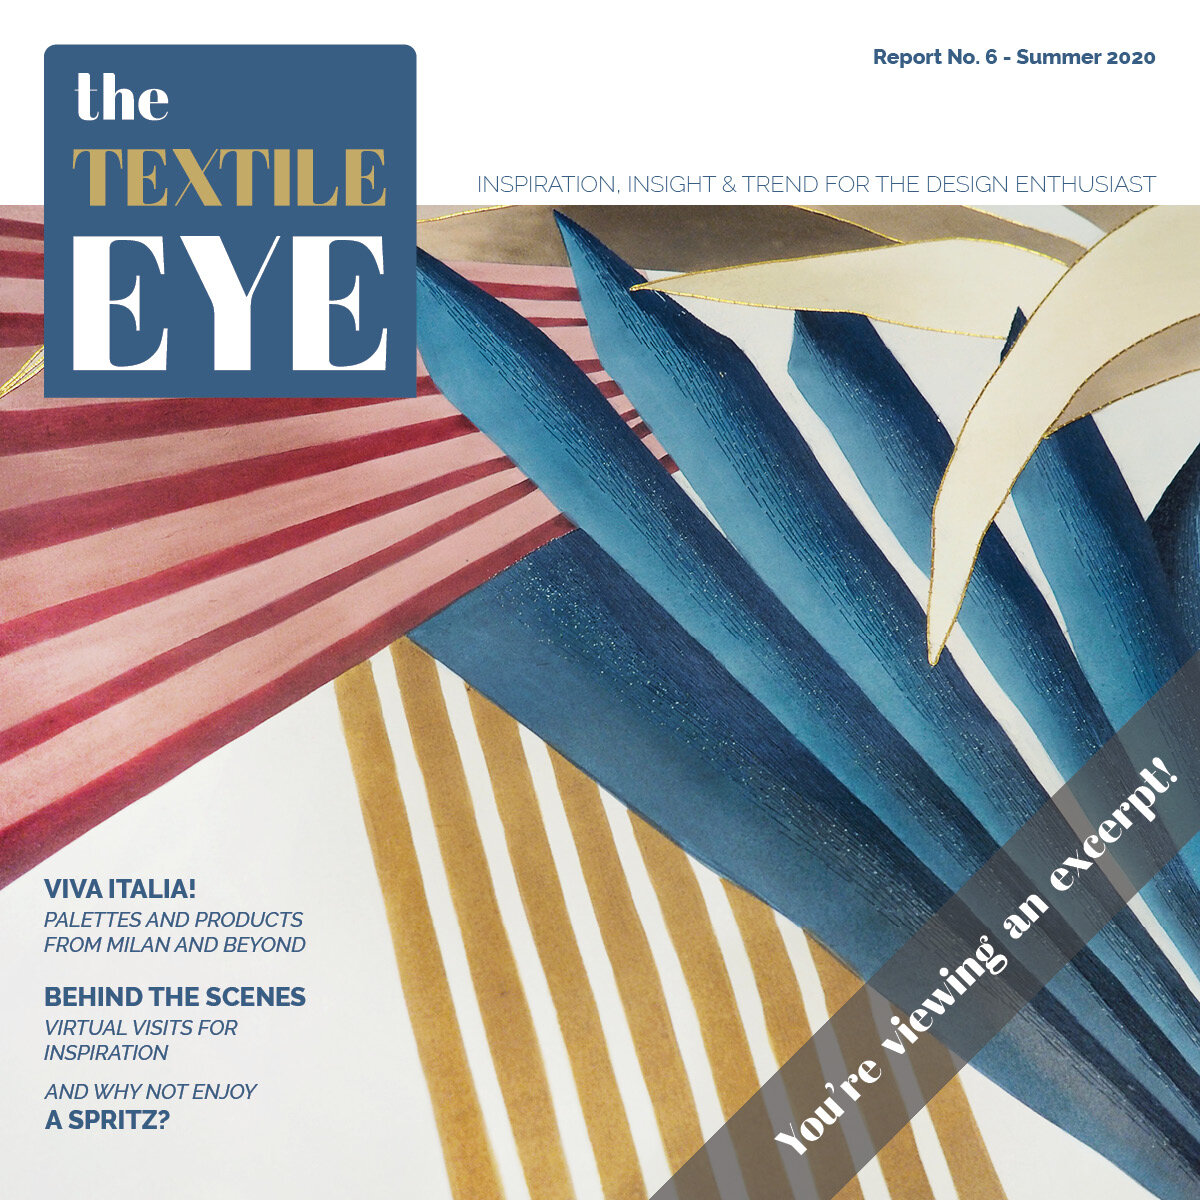 The Textile Eye Issue 6 Summer 20 Excerpts for Web2.jpg